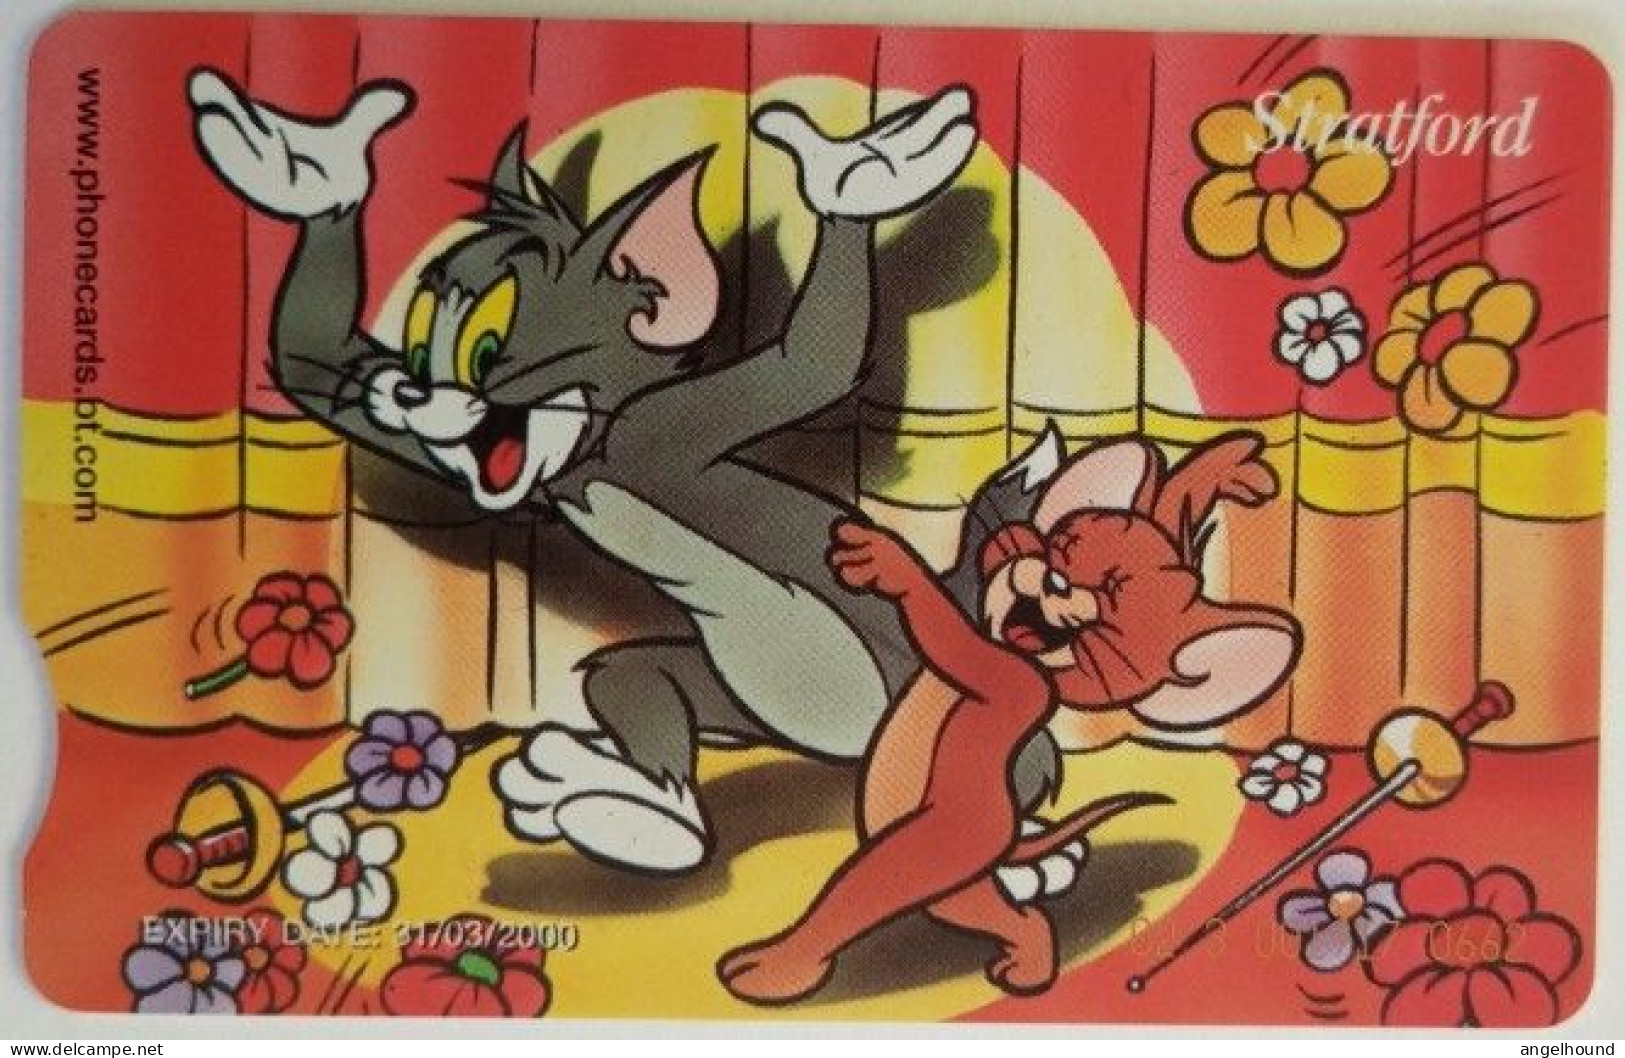 UK BT £3 Chip Card -  Special Edition " Tom And Jerry " - BT Promotie